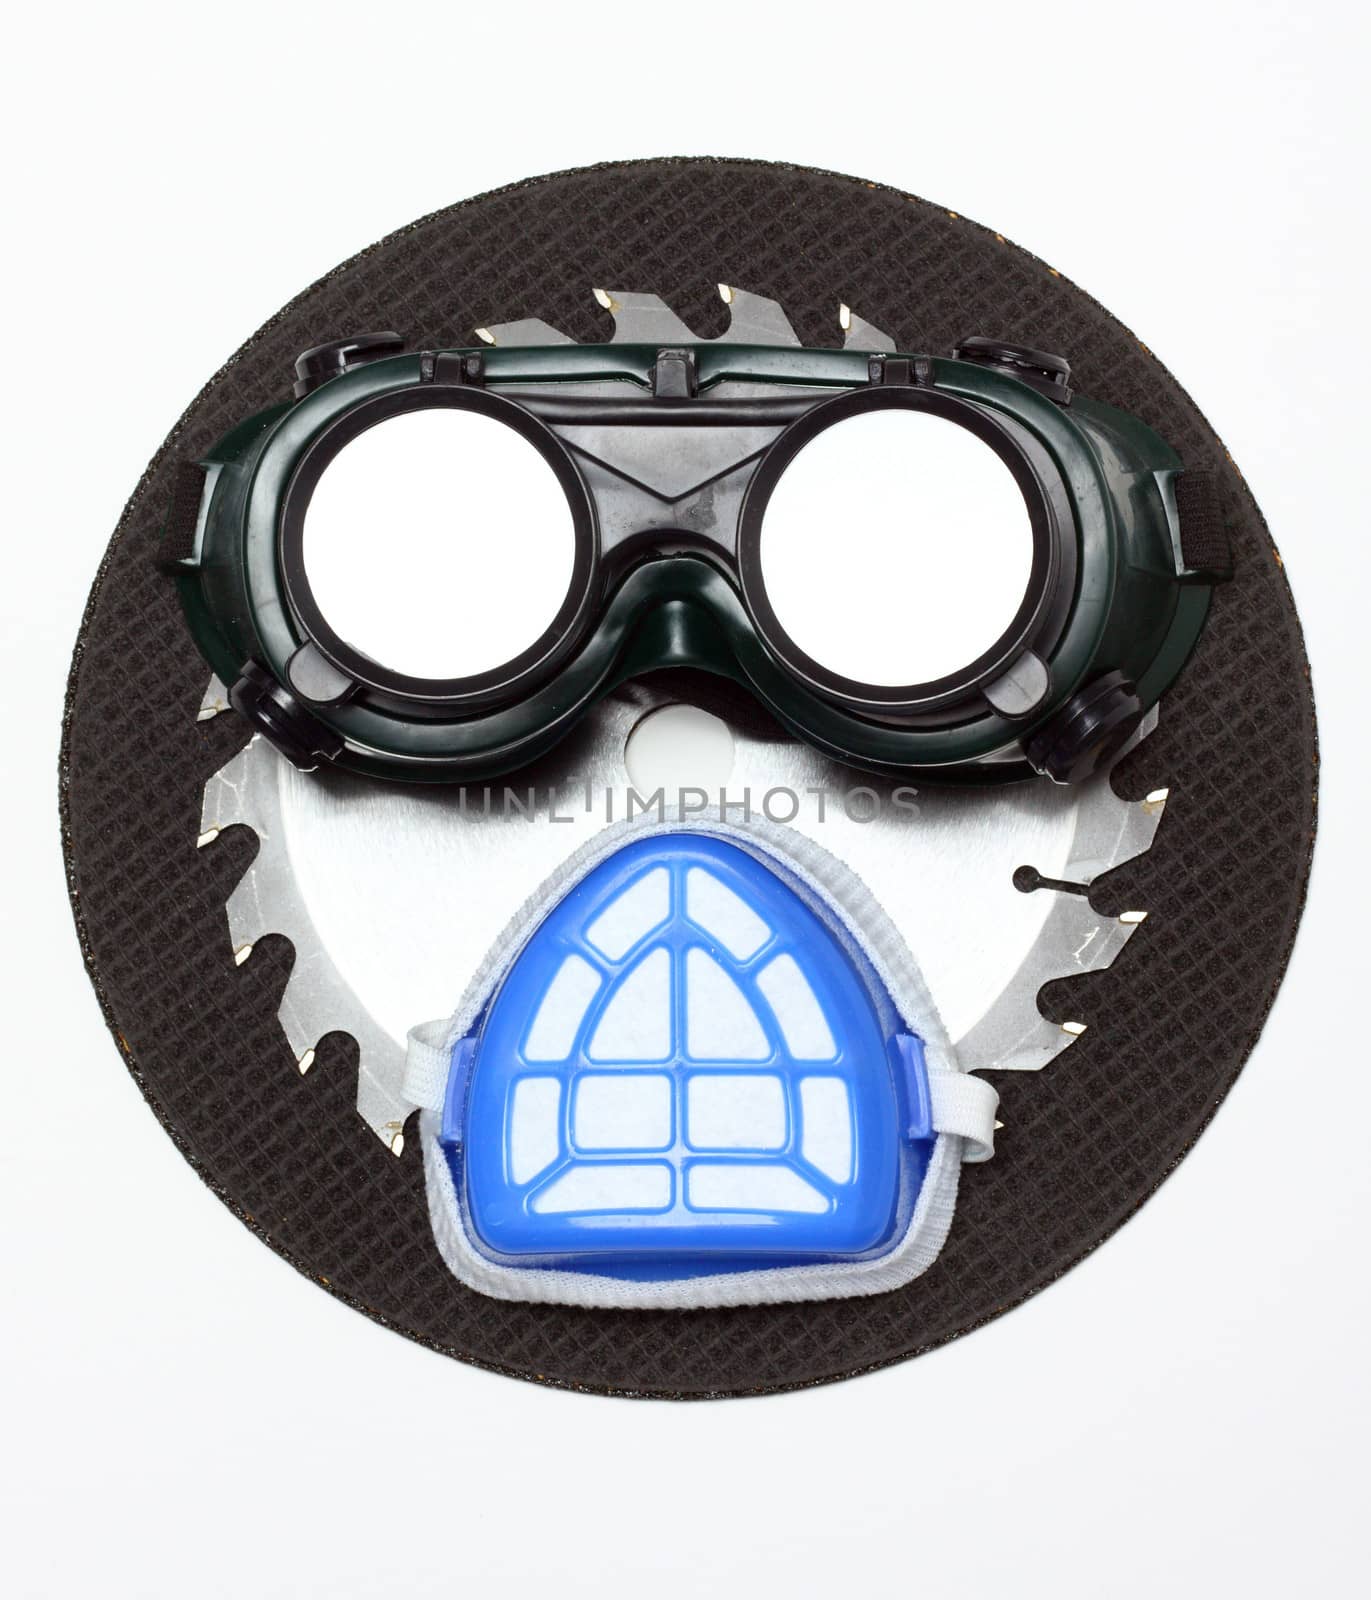 goggles and a mask as a human face. safety concept